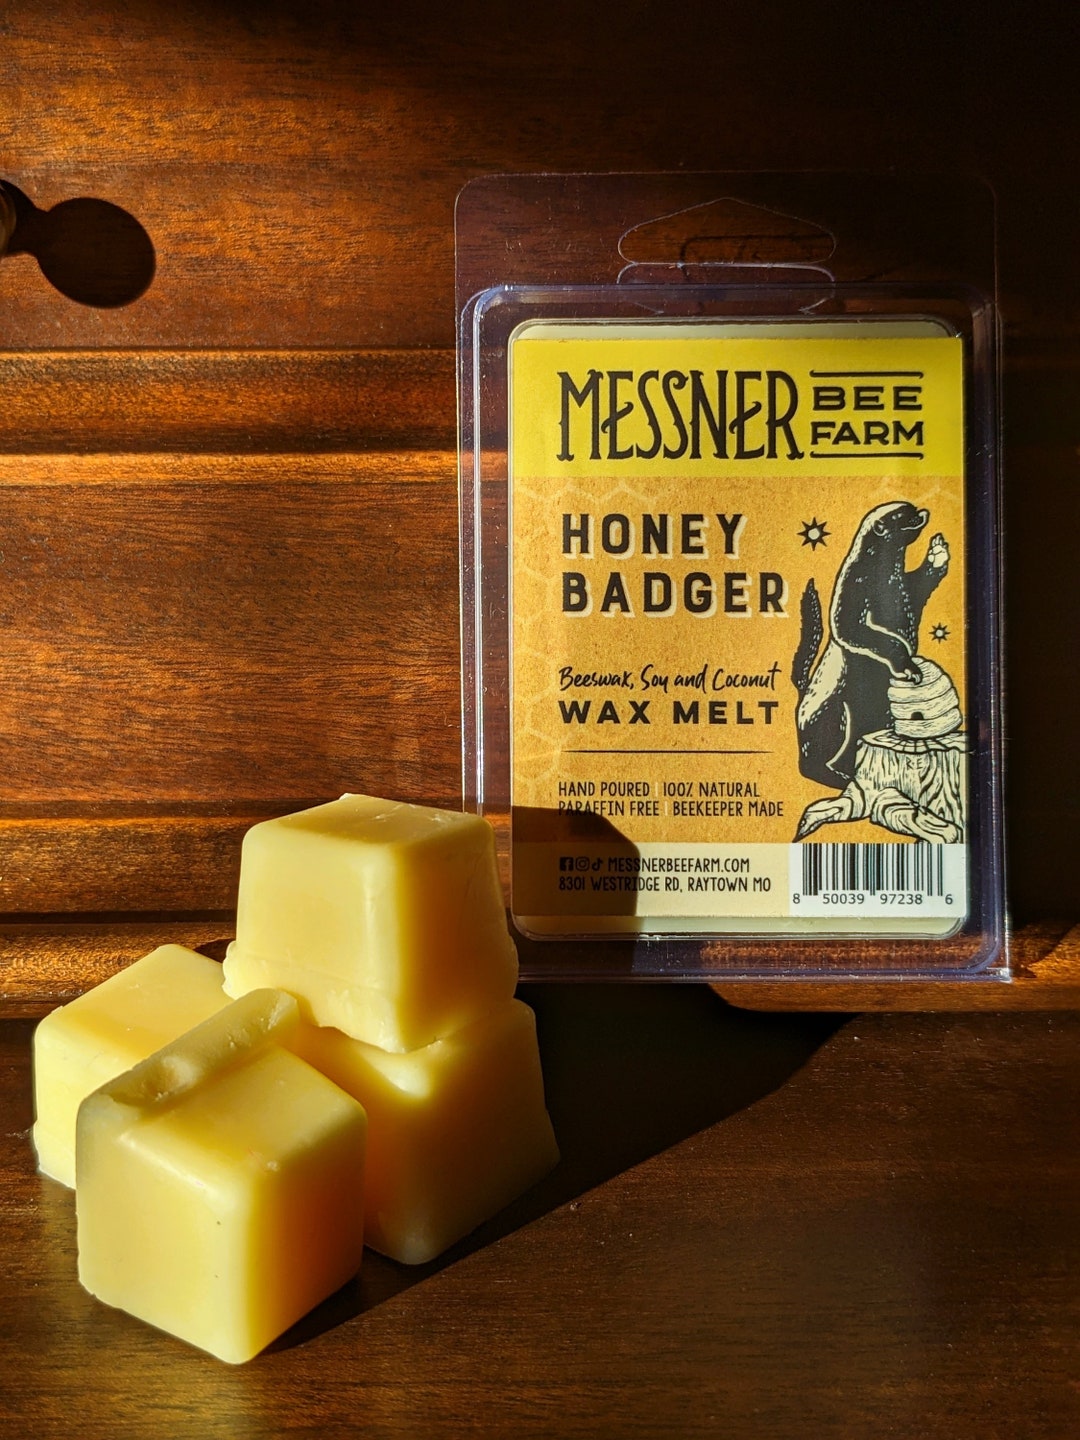 Honey Badger Wax Melt Made With Soy Beeswax and Coconut